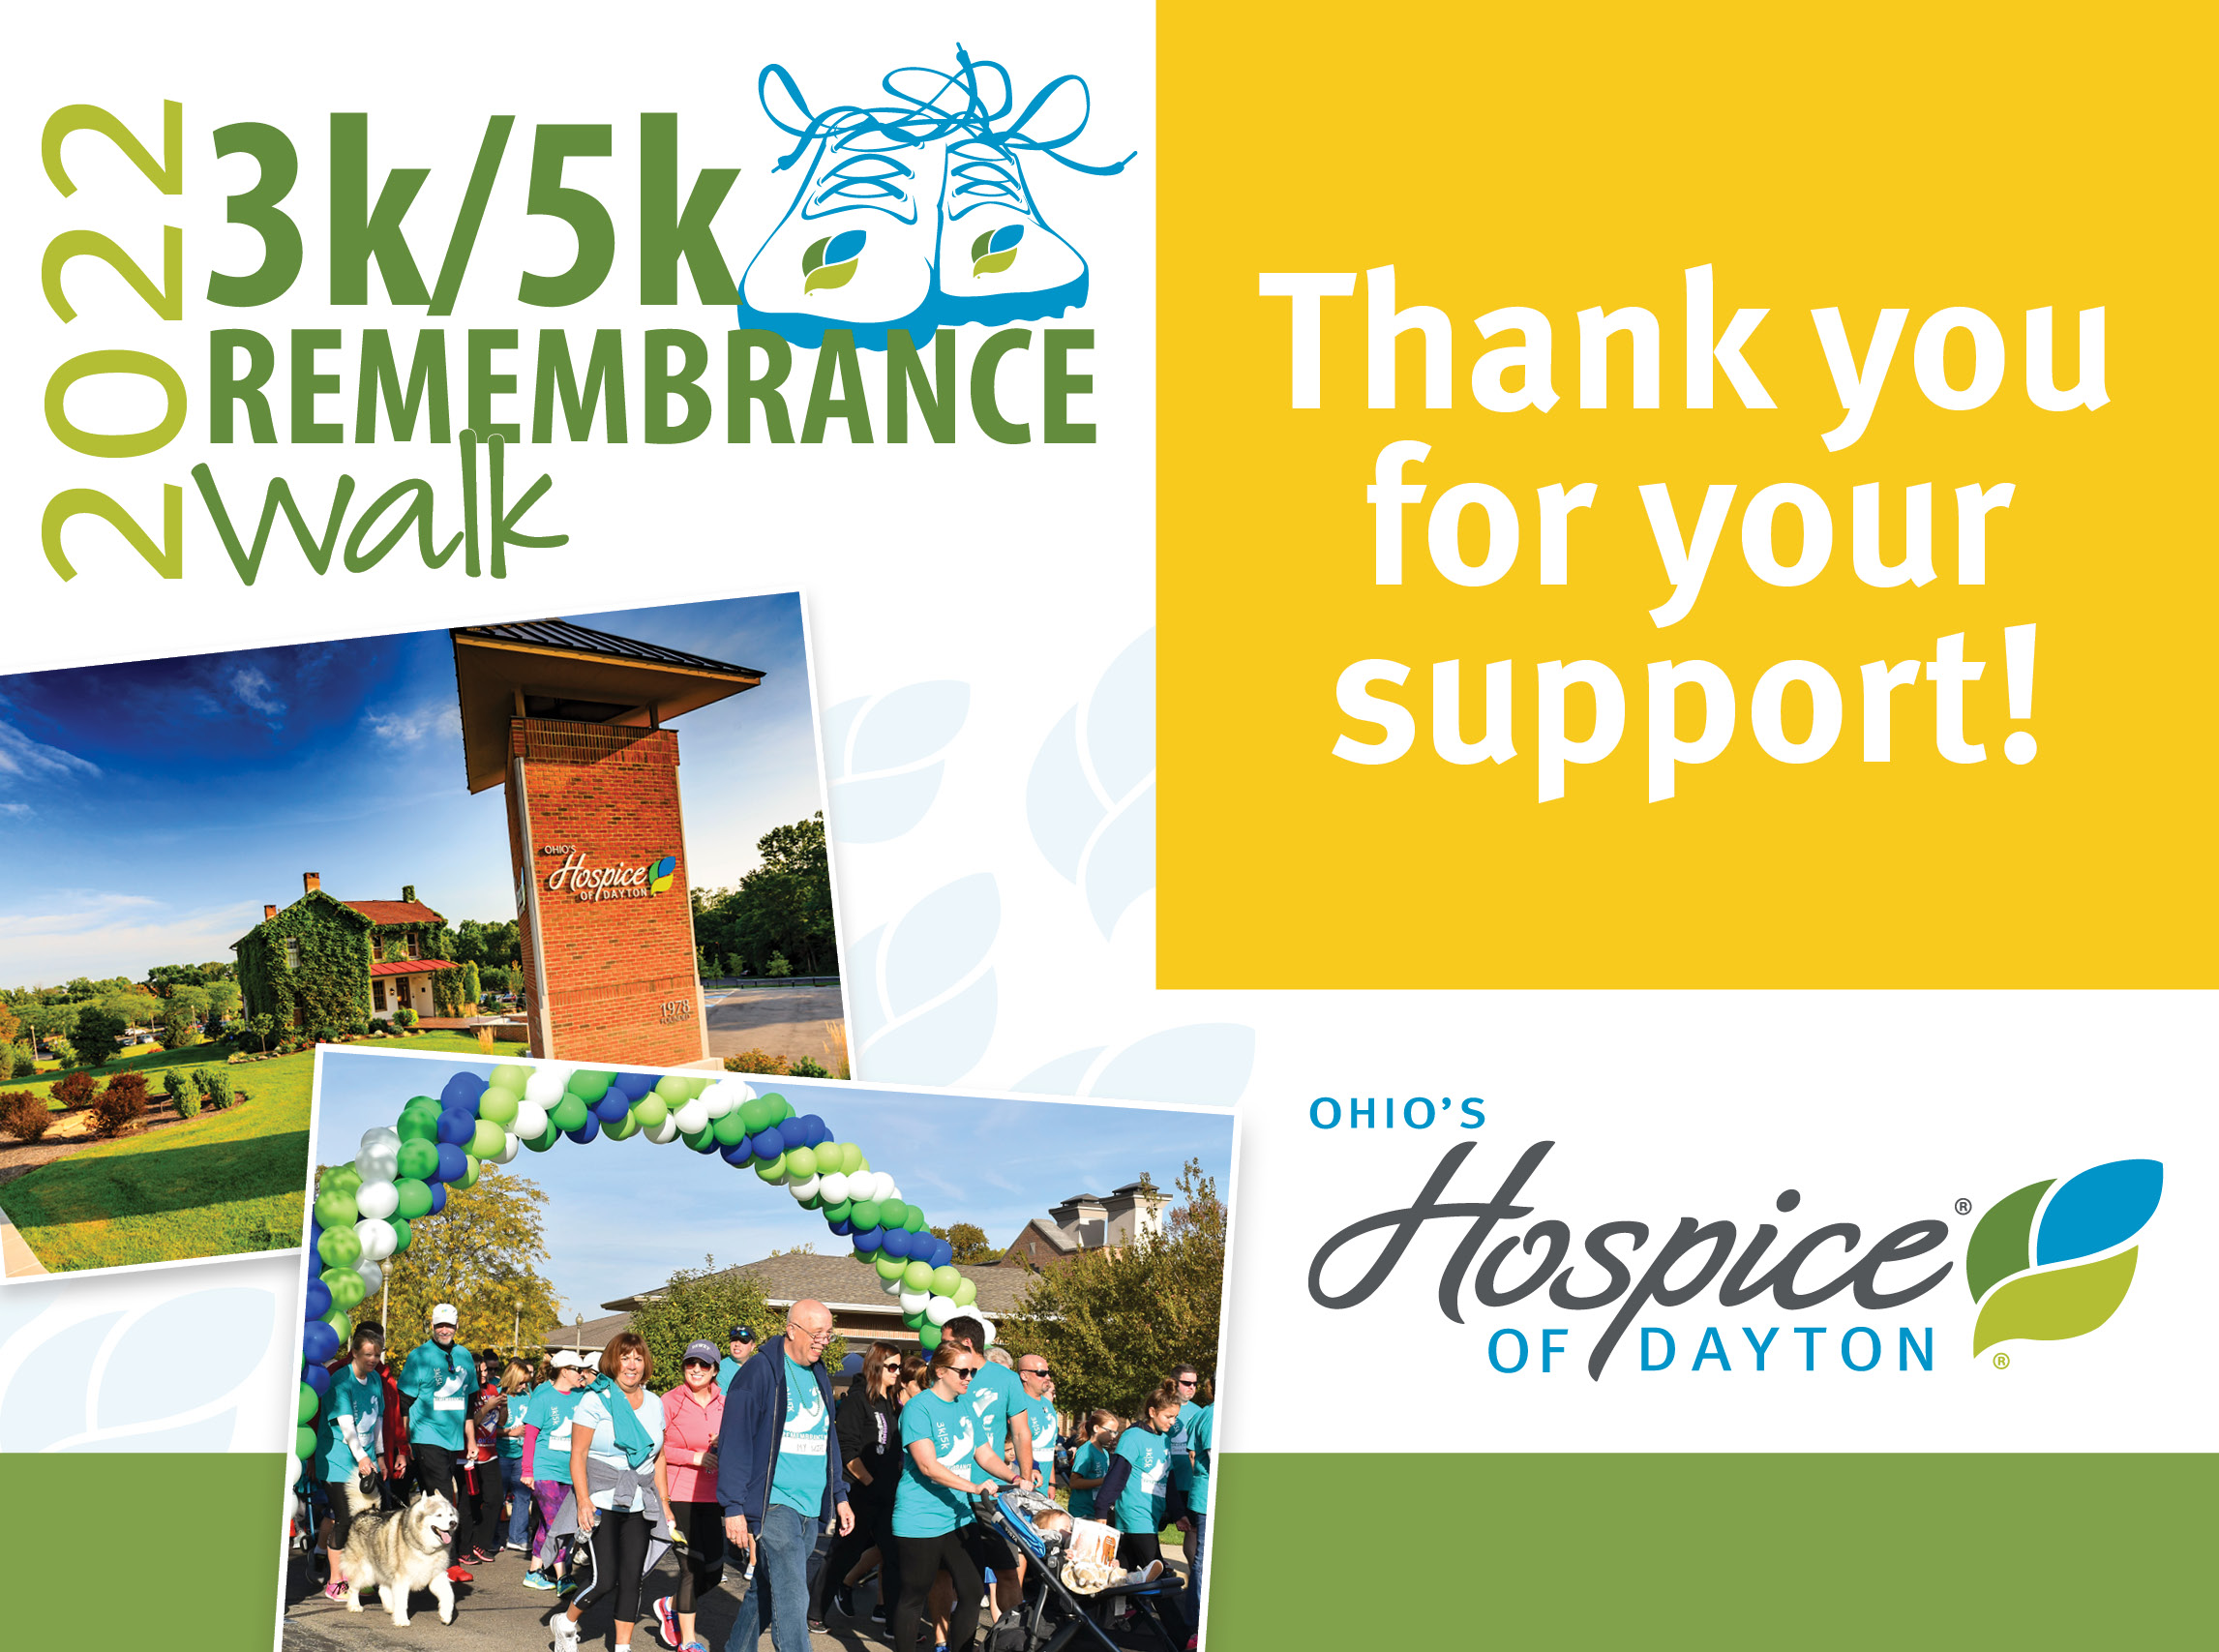 2022 3k/5k Remembrance Walk: Thank you for your support!